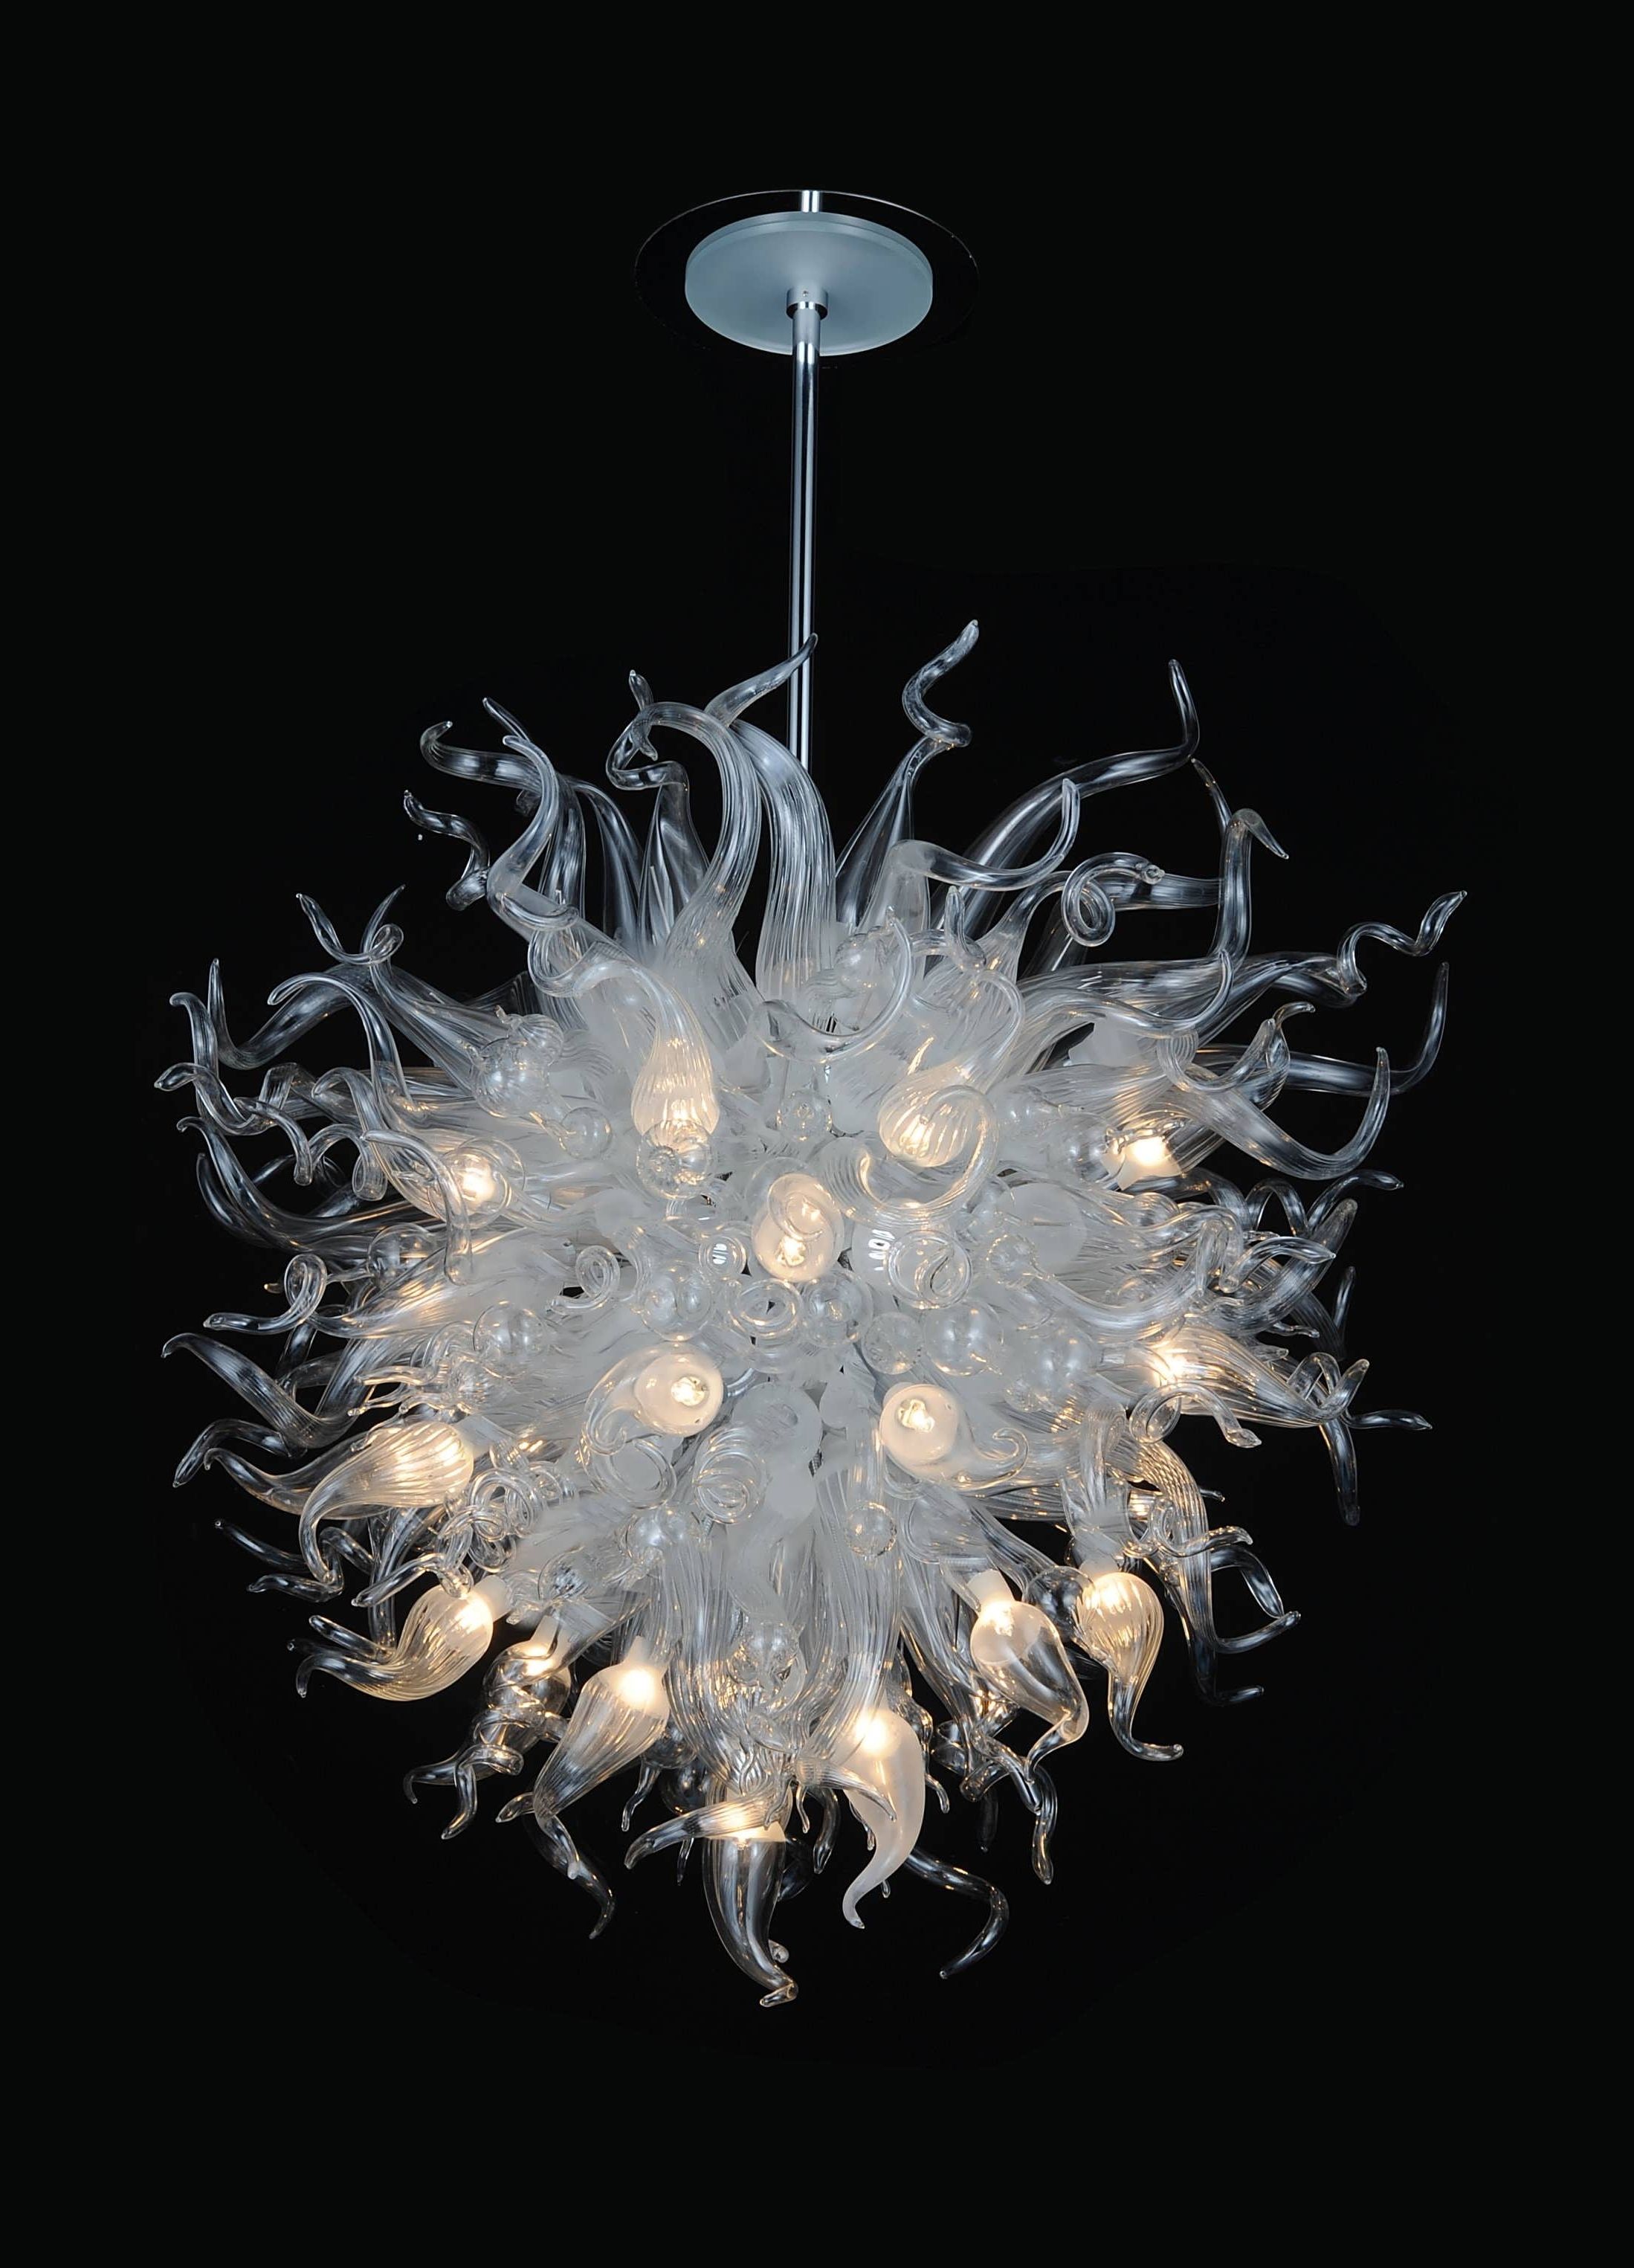 Light : Glass Chandelier Shades Ceiling Lights Blown Artist Lighting Throughout Recent Glass Chandeliers (View 10 of 20)